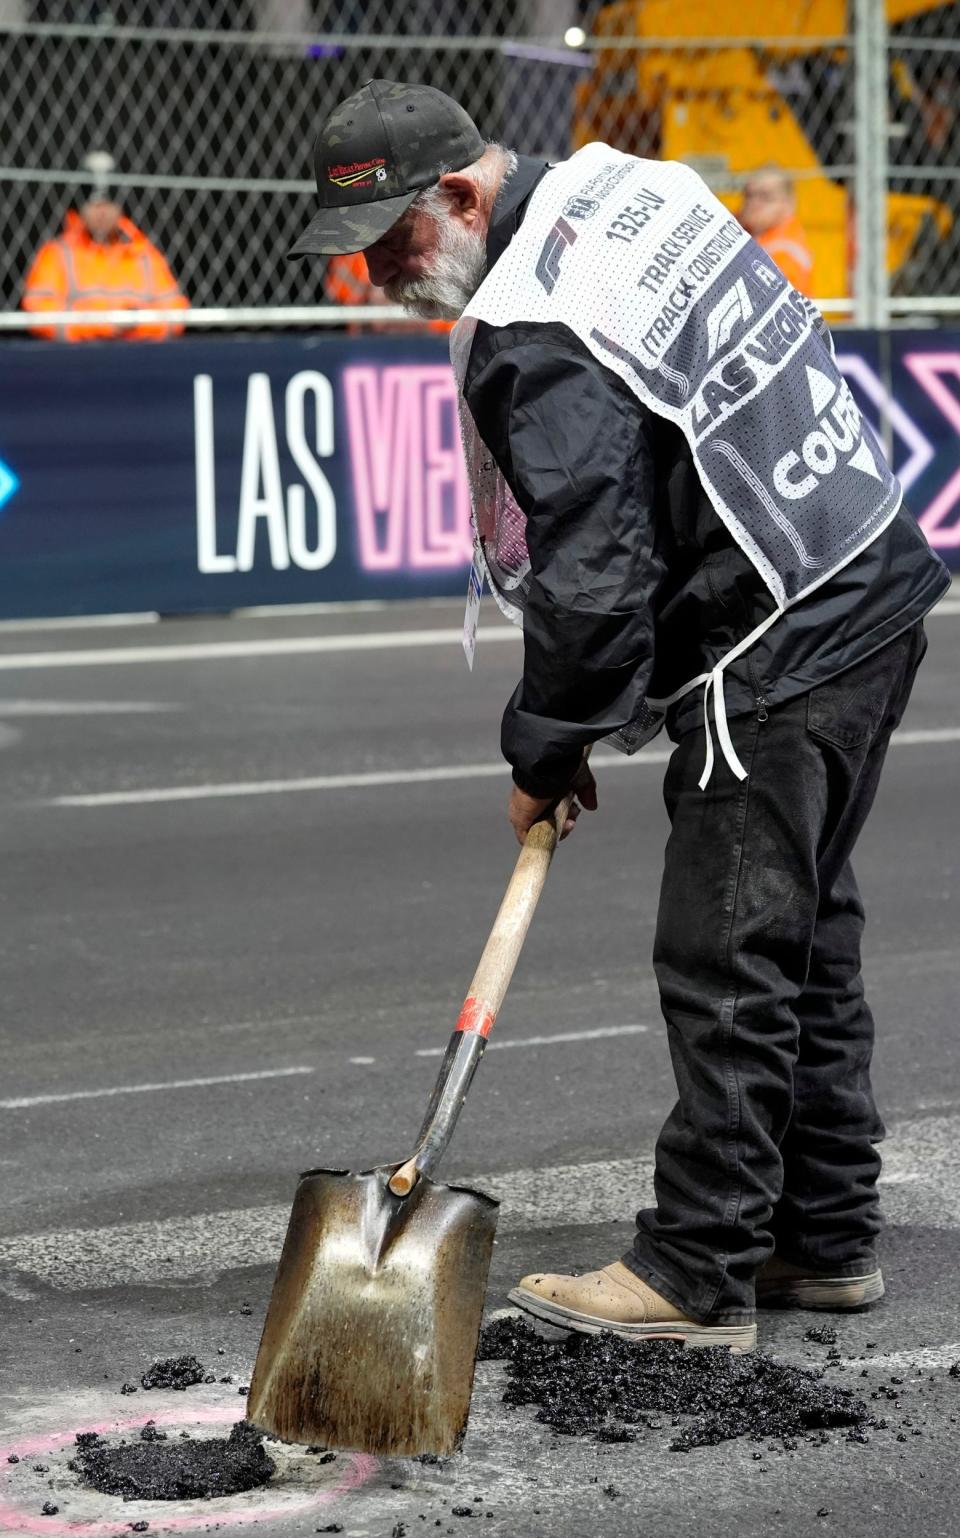 A worker fills in a hole before the start of the second practice session for the Formula One Las Vegas Grand Prix